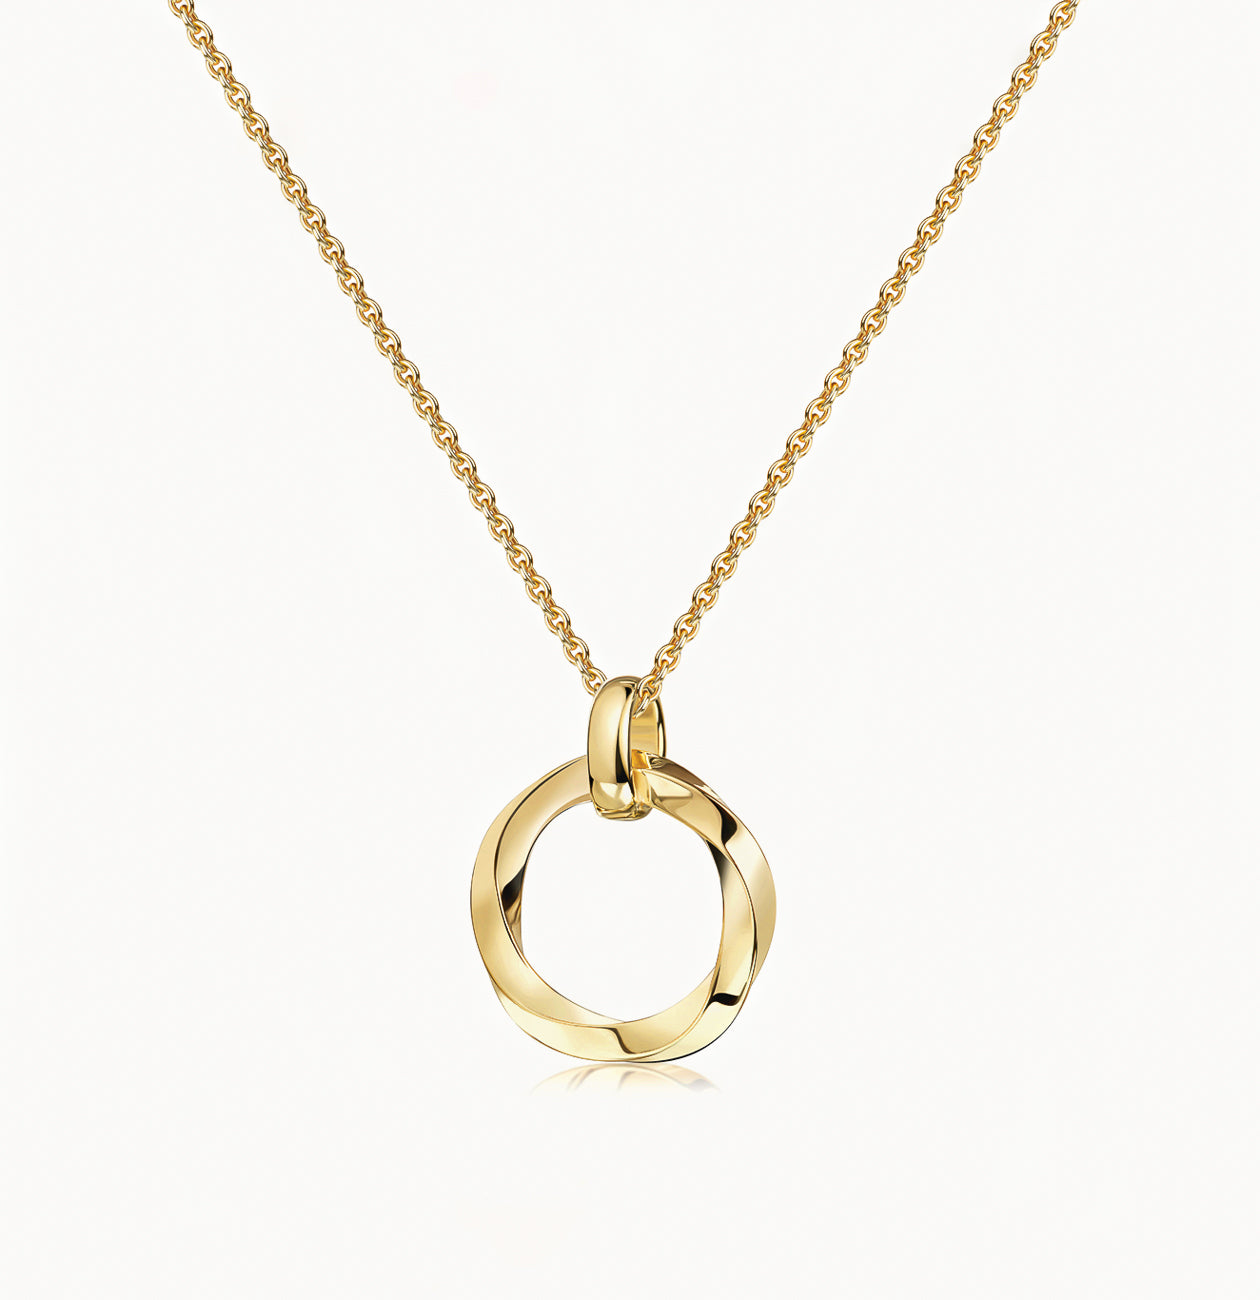 Chunky Twisted Circle Necklace in 14k Gold Vermeil